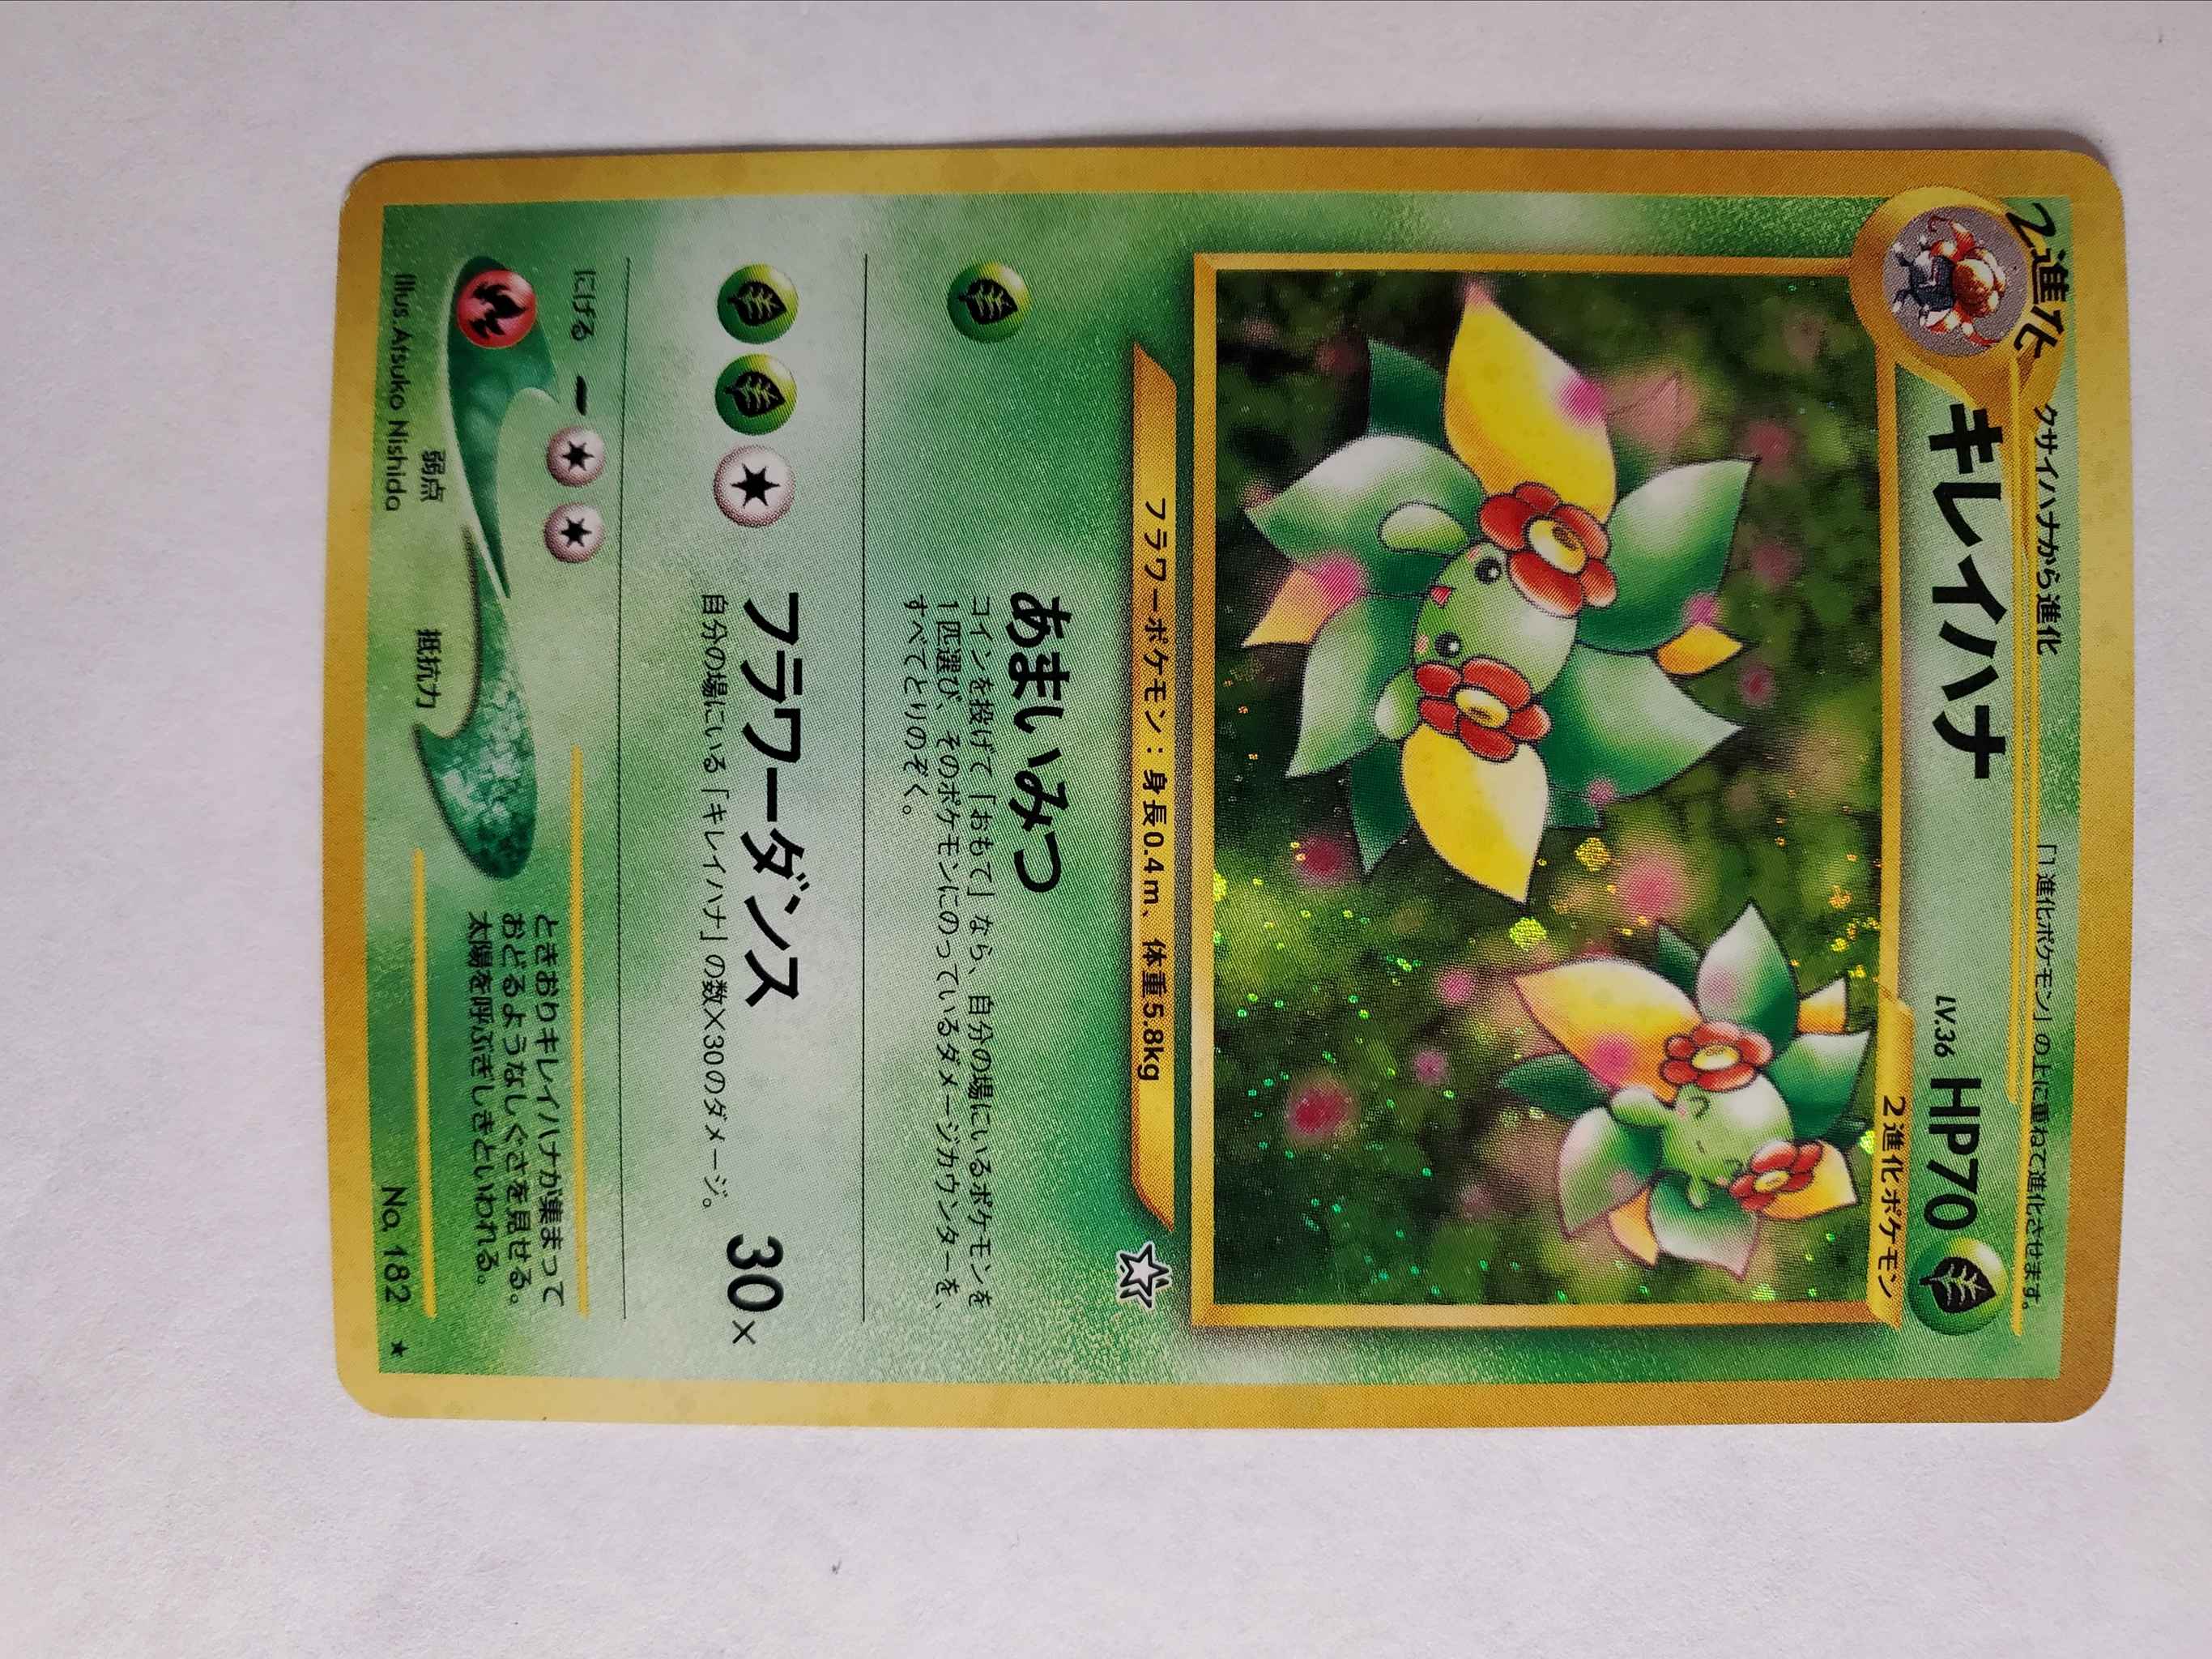 Japanese Bellossom Neo Genesis Lp Bellossom Neo Genesis Pokemon Online Gaming Store For Cards Miniatures Singles Packs Booster Boxes